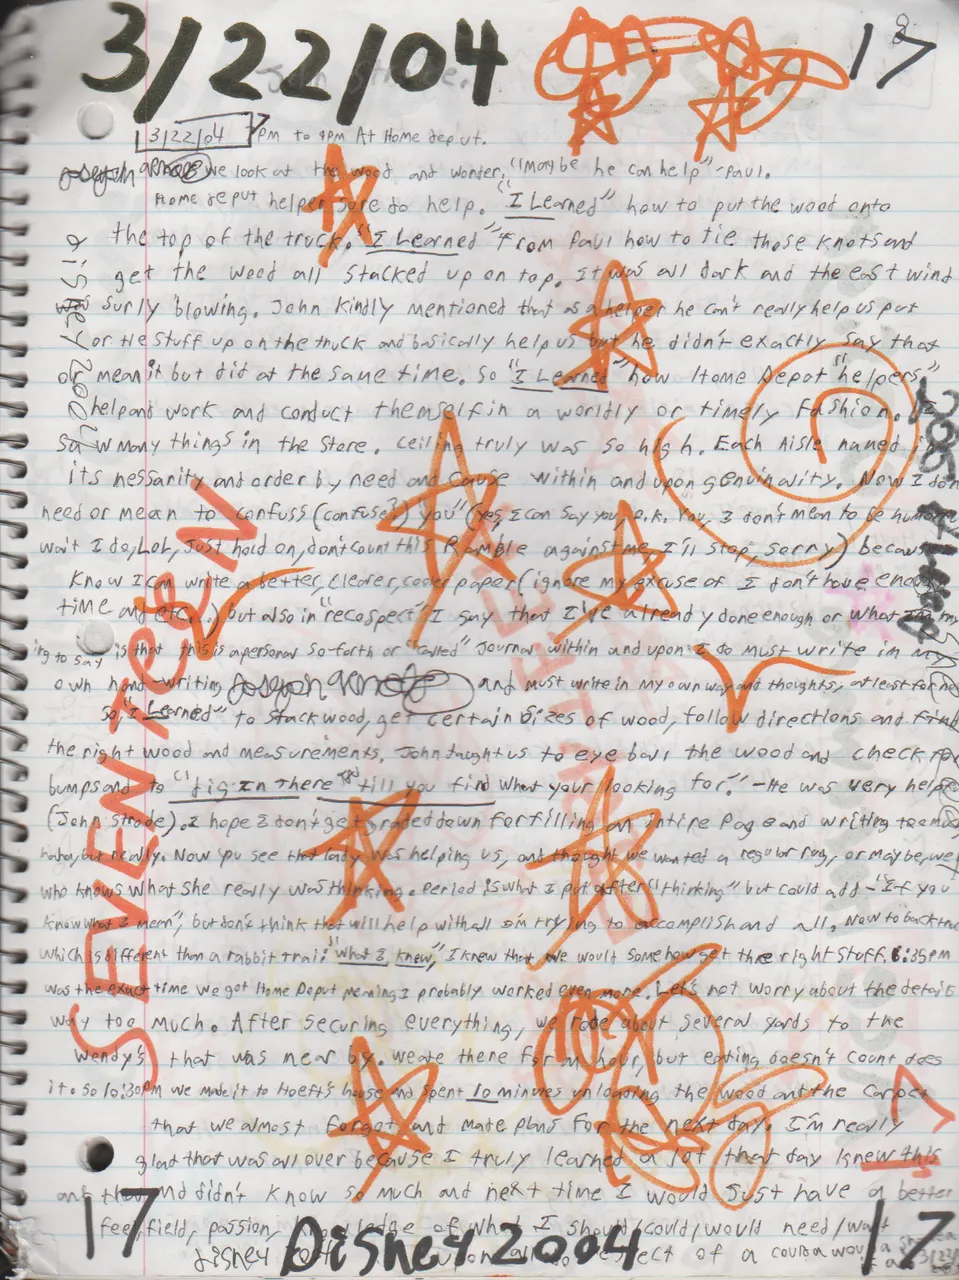 2004-01-29 - Thursday - Carpetball FGHS Senior Project Journal, Joey Arnold, Part 02, 96pages numbered, Notebook-12 ok.png